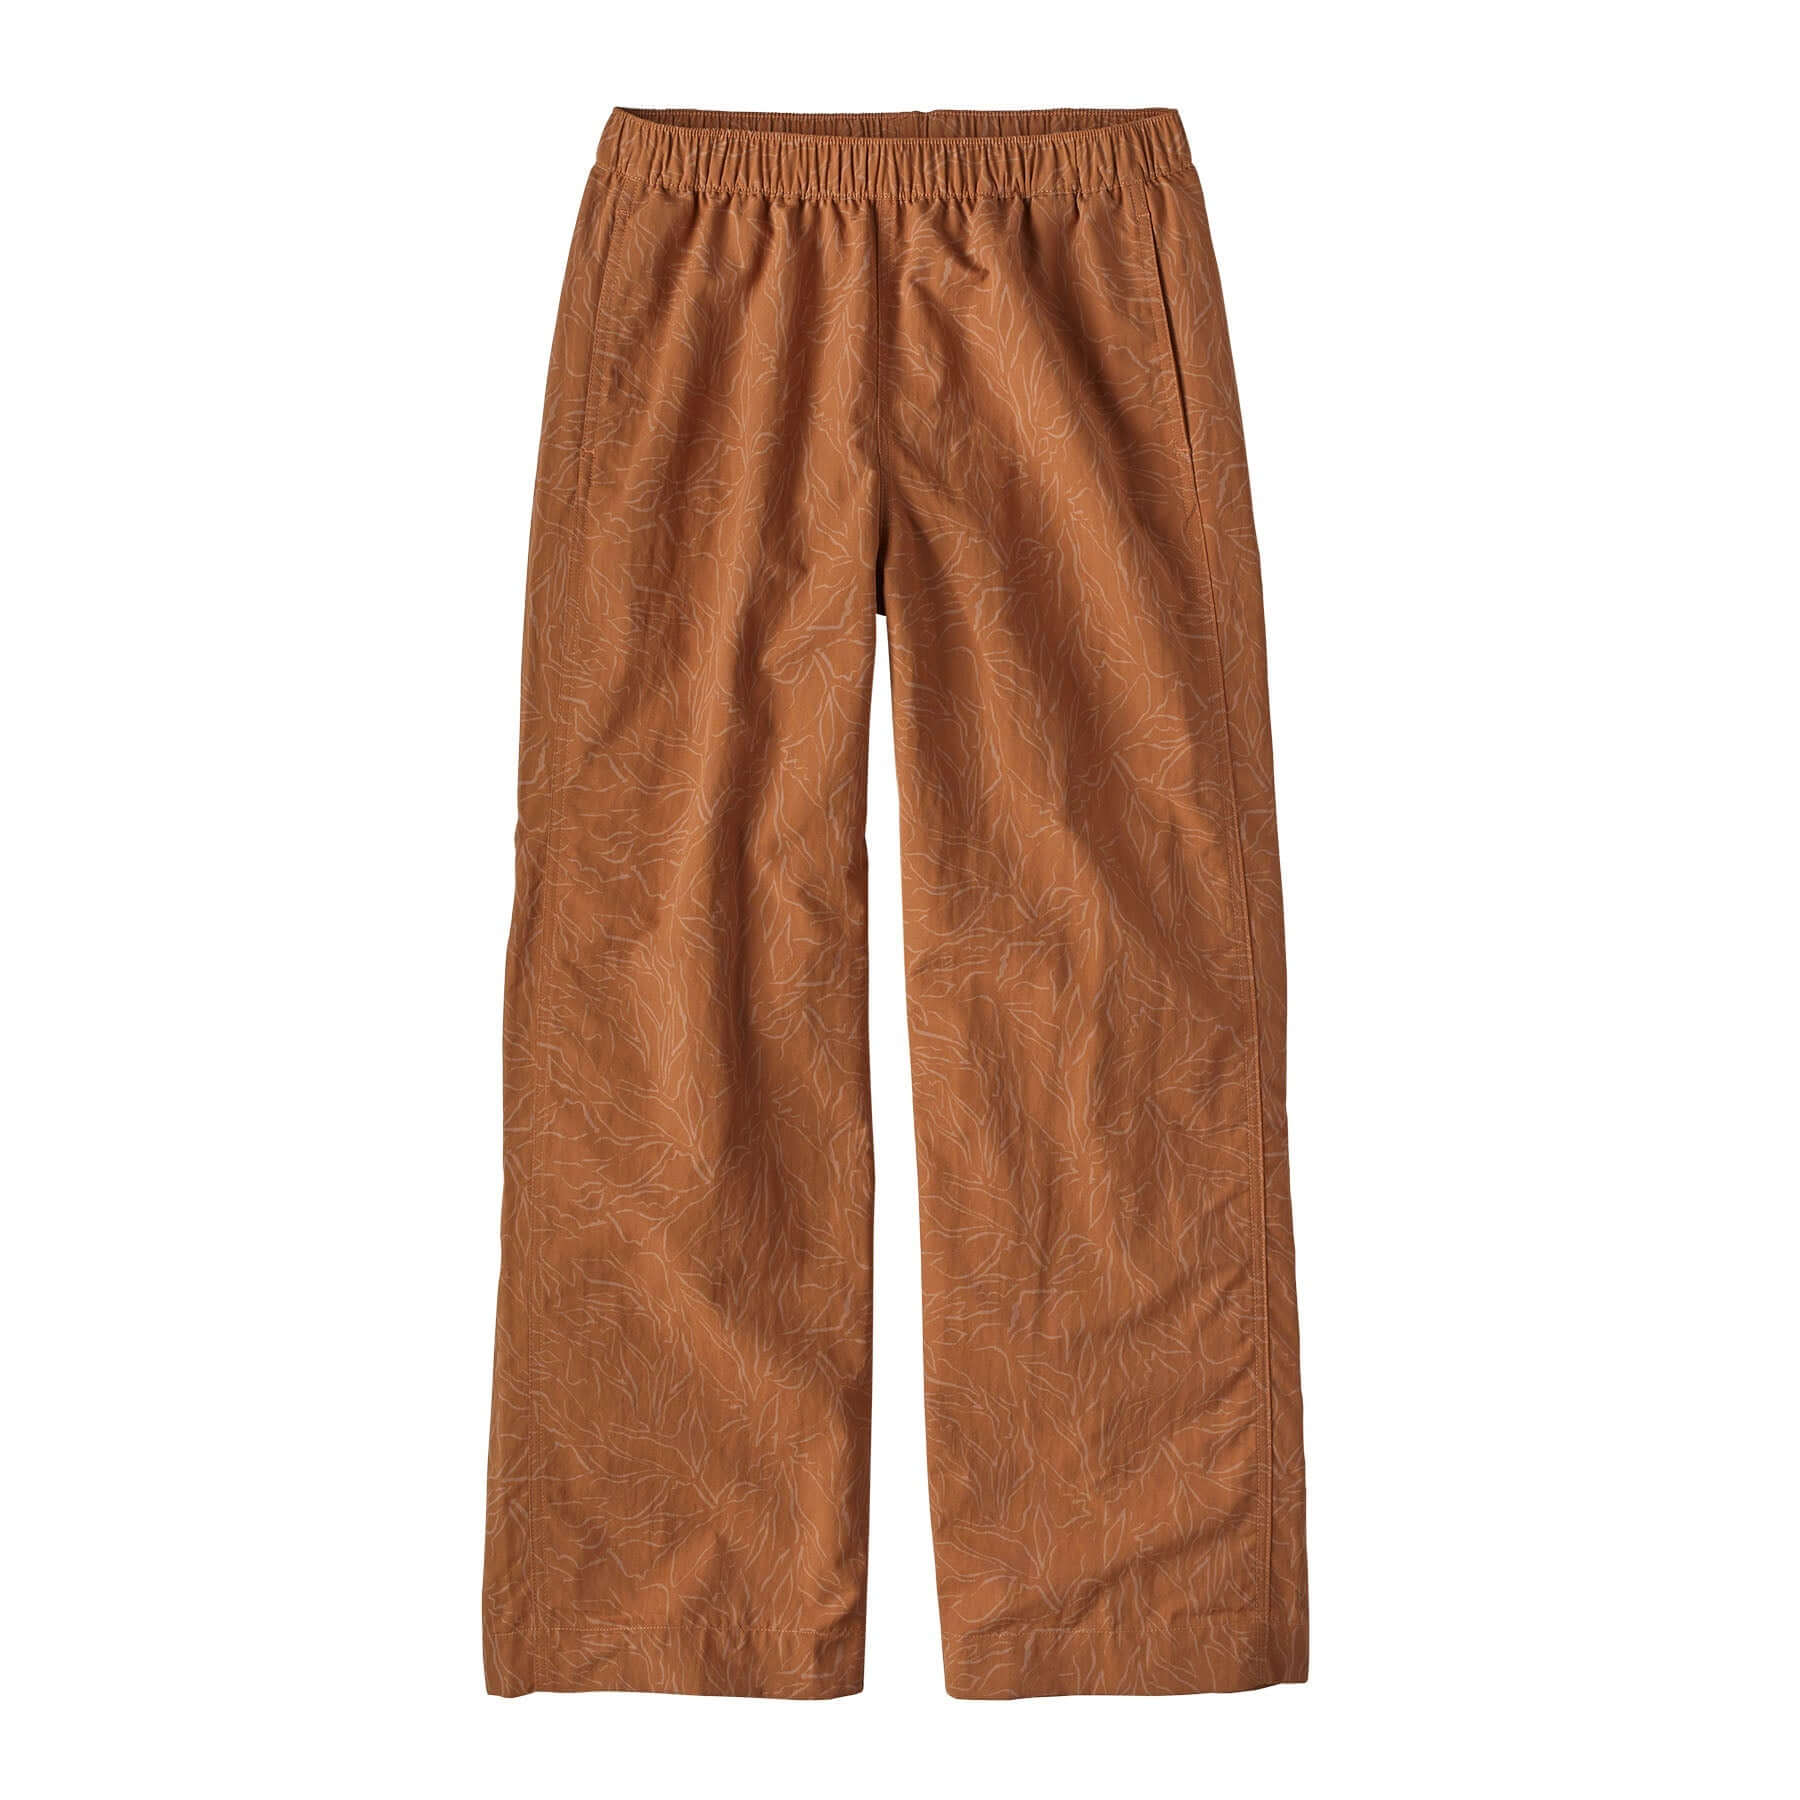 Women's Outdoor Everyday Pants in Over Under Water: Sienna Clay | Patagonia Bend